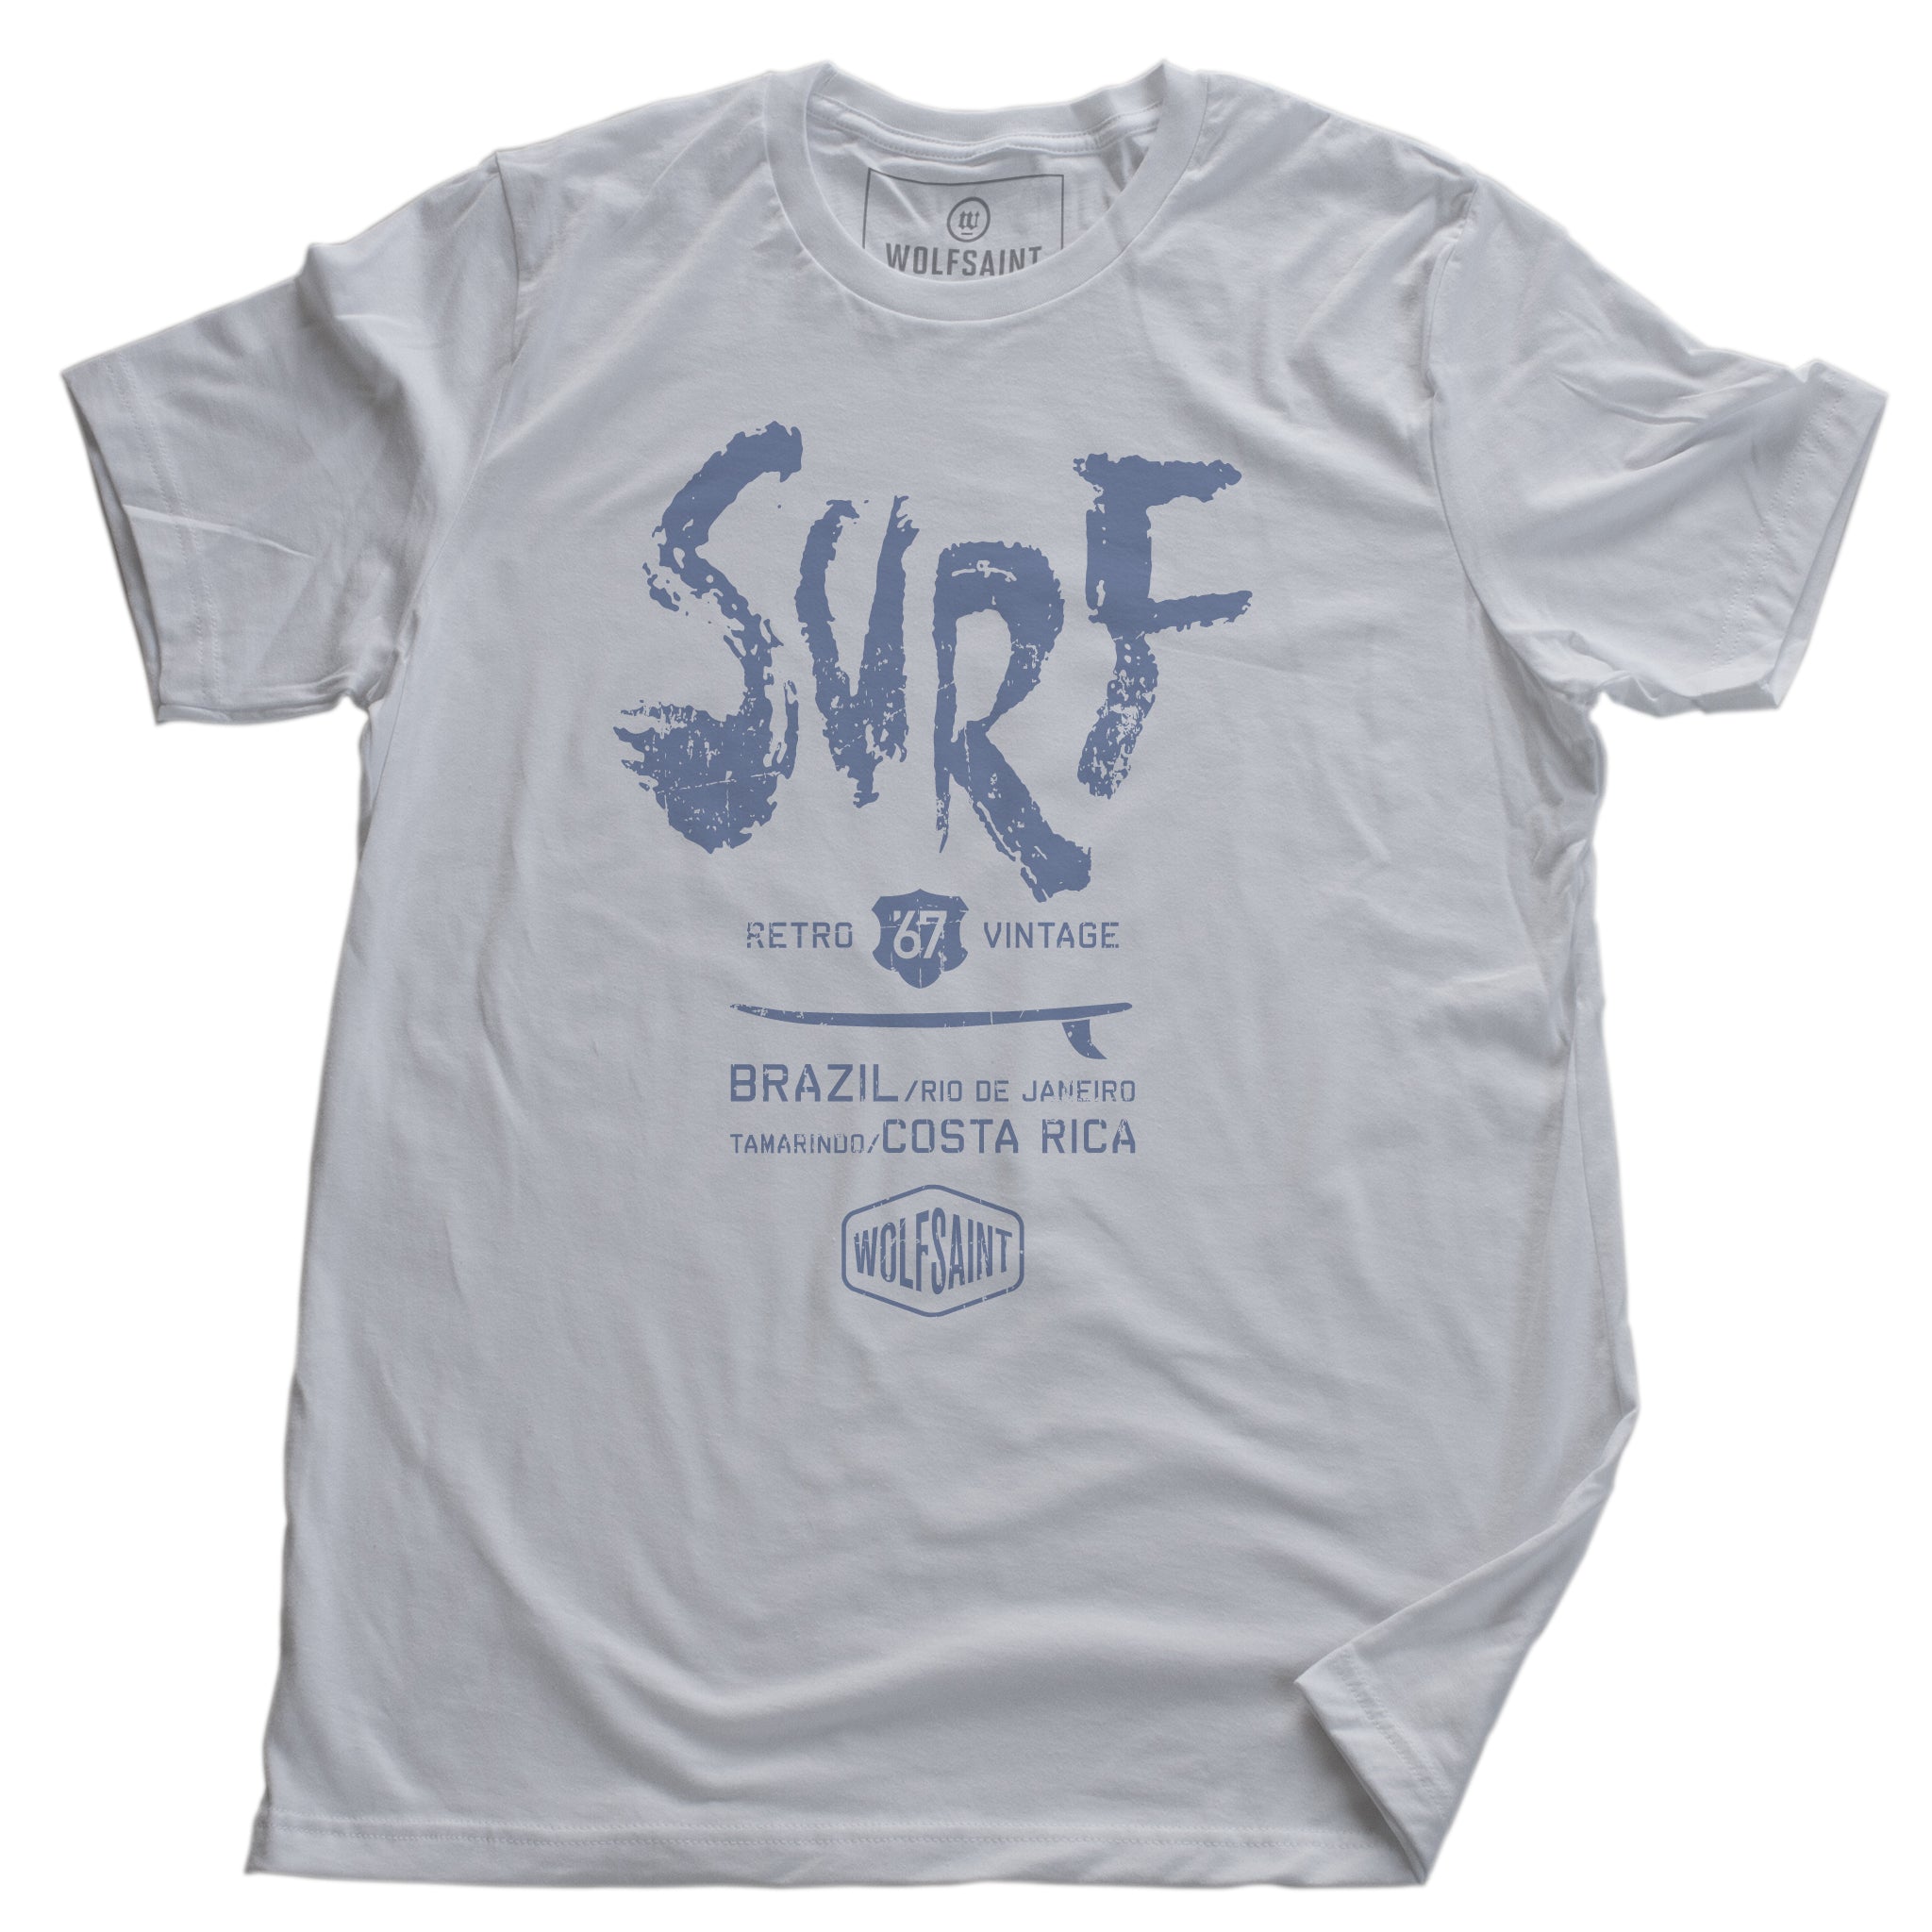 A fashionable graphic t-shirt with a retro, vintage design. This shirt features a surfboard graphic beneath large painted type which reads “SURF” and below it “Brazil, Rio de Janeiro, and Tamarindo, Costa Rica” above the Wolfsaint logo.  For wolfsaint.net